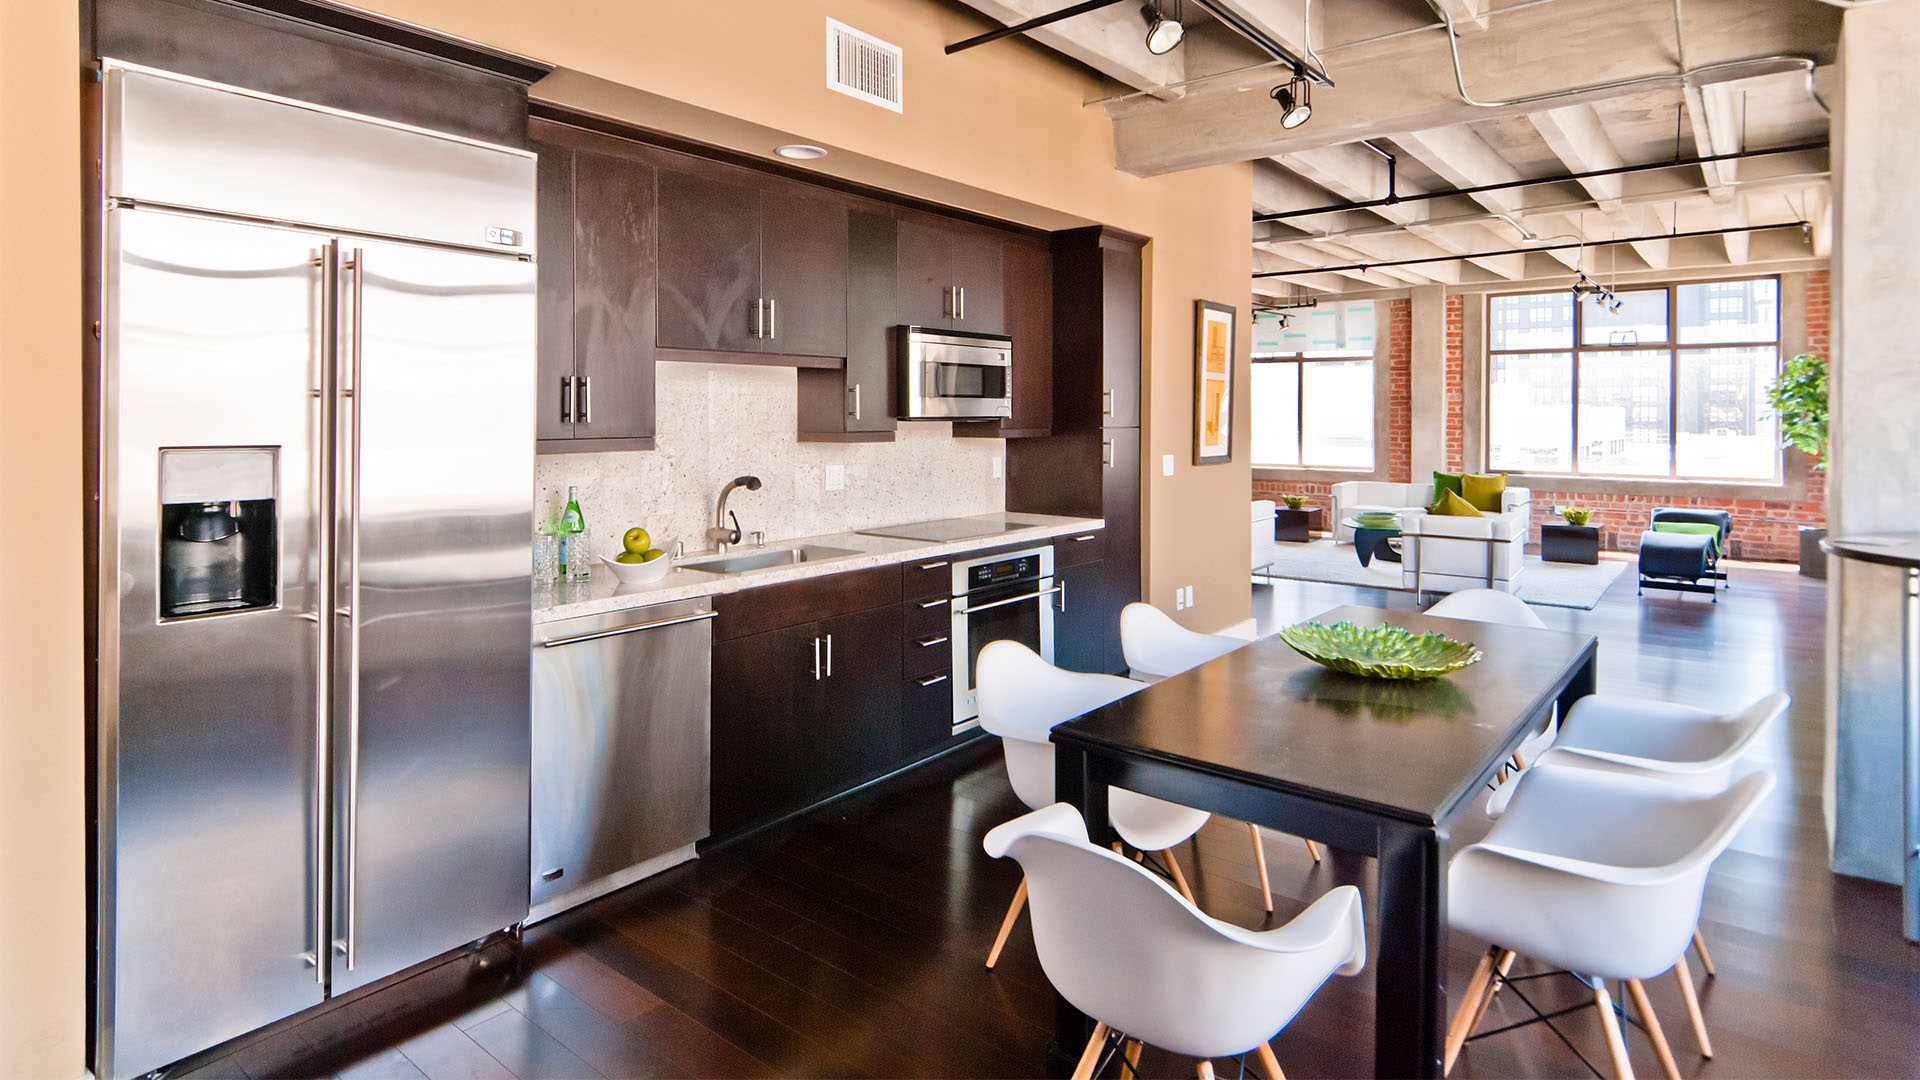 LA Live loft apartments for rent in LA - The Brockman Lofts Modern upgraded kitchen with stainless steel appliances